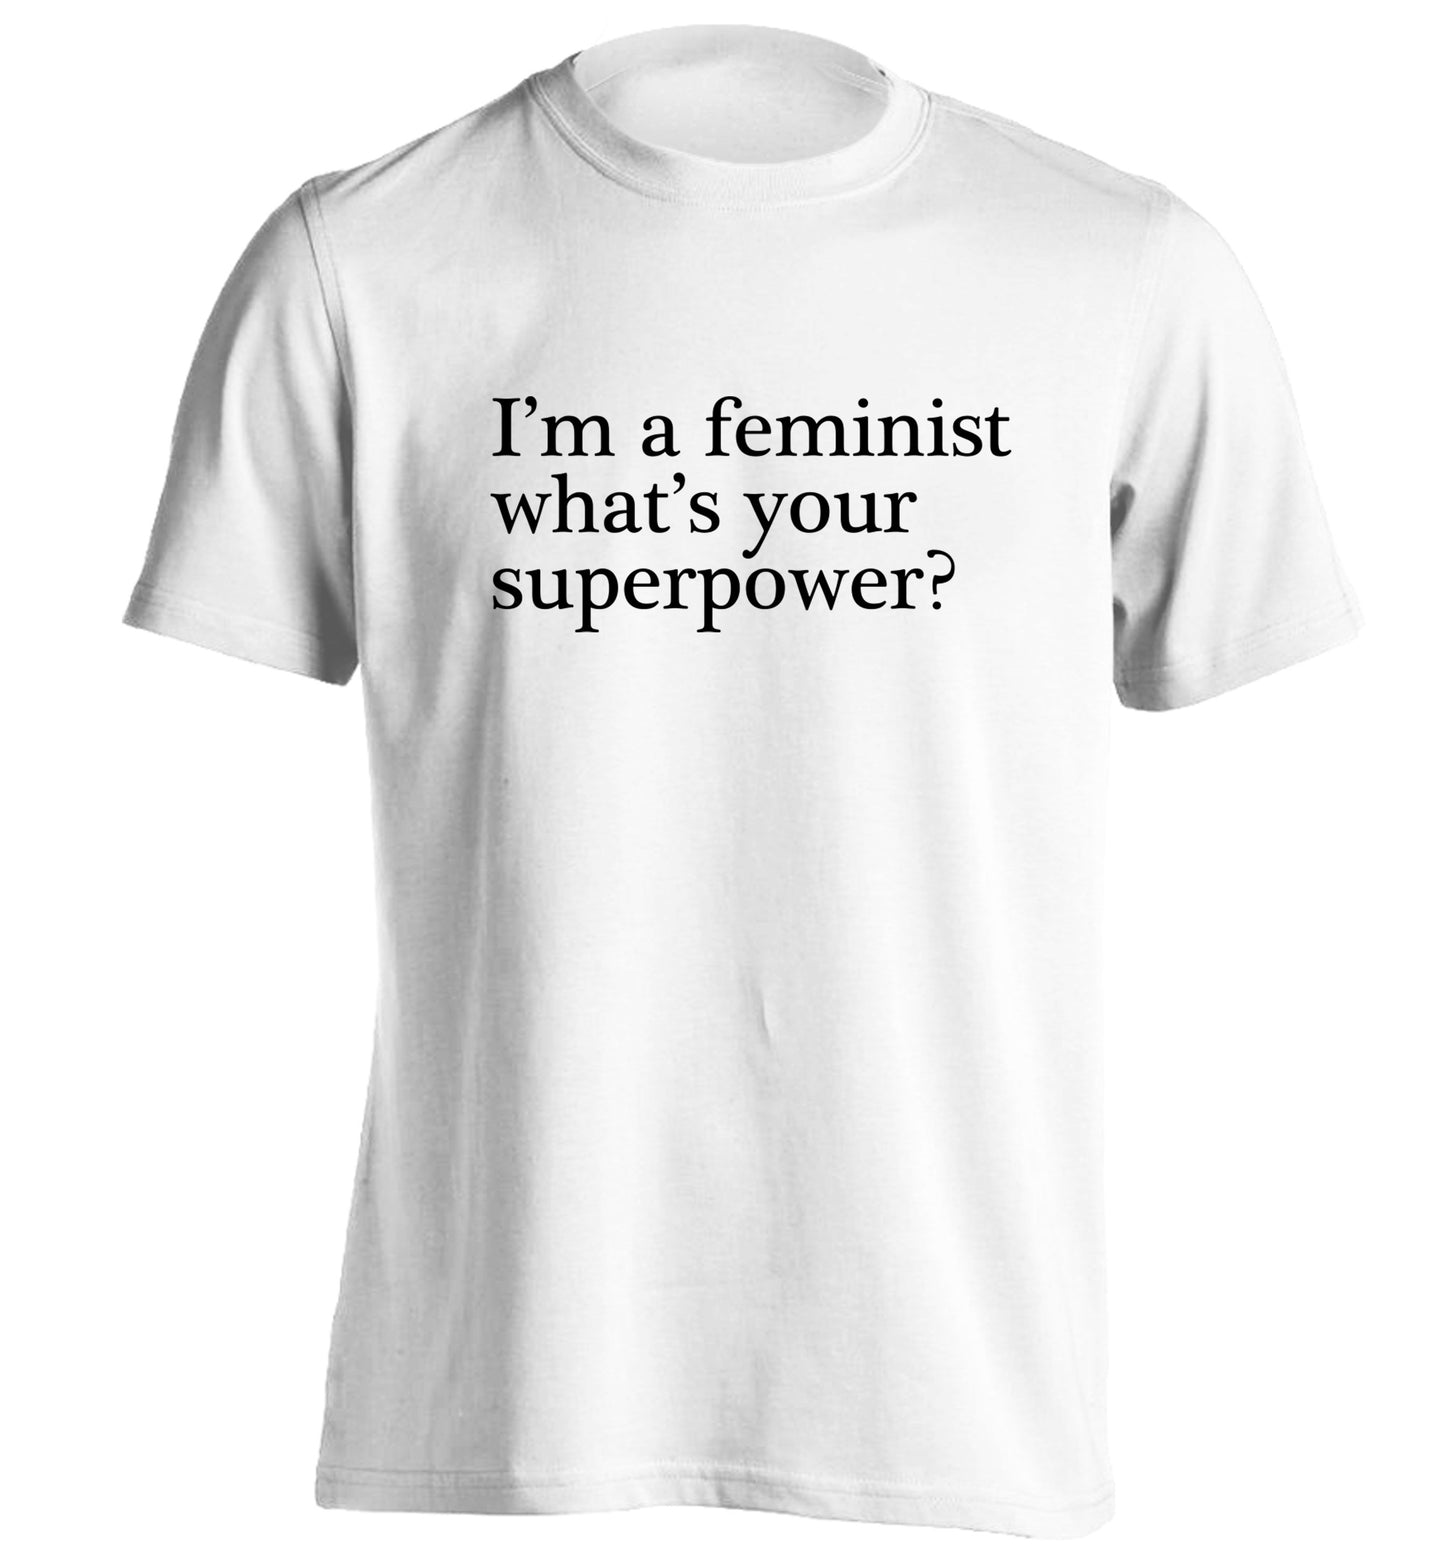 I'm a feminist what's your superpower? adults unisex white Tshirt 2XL